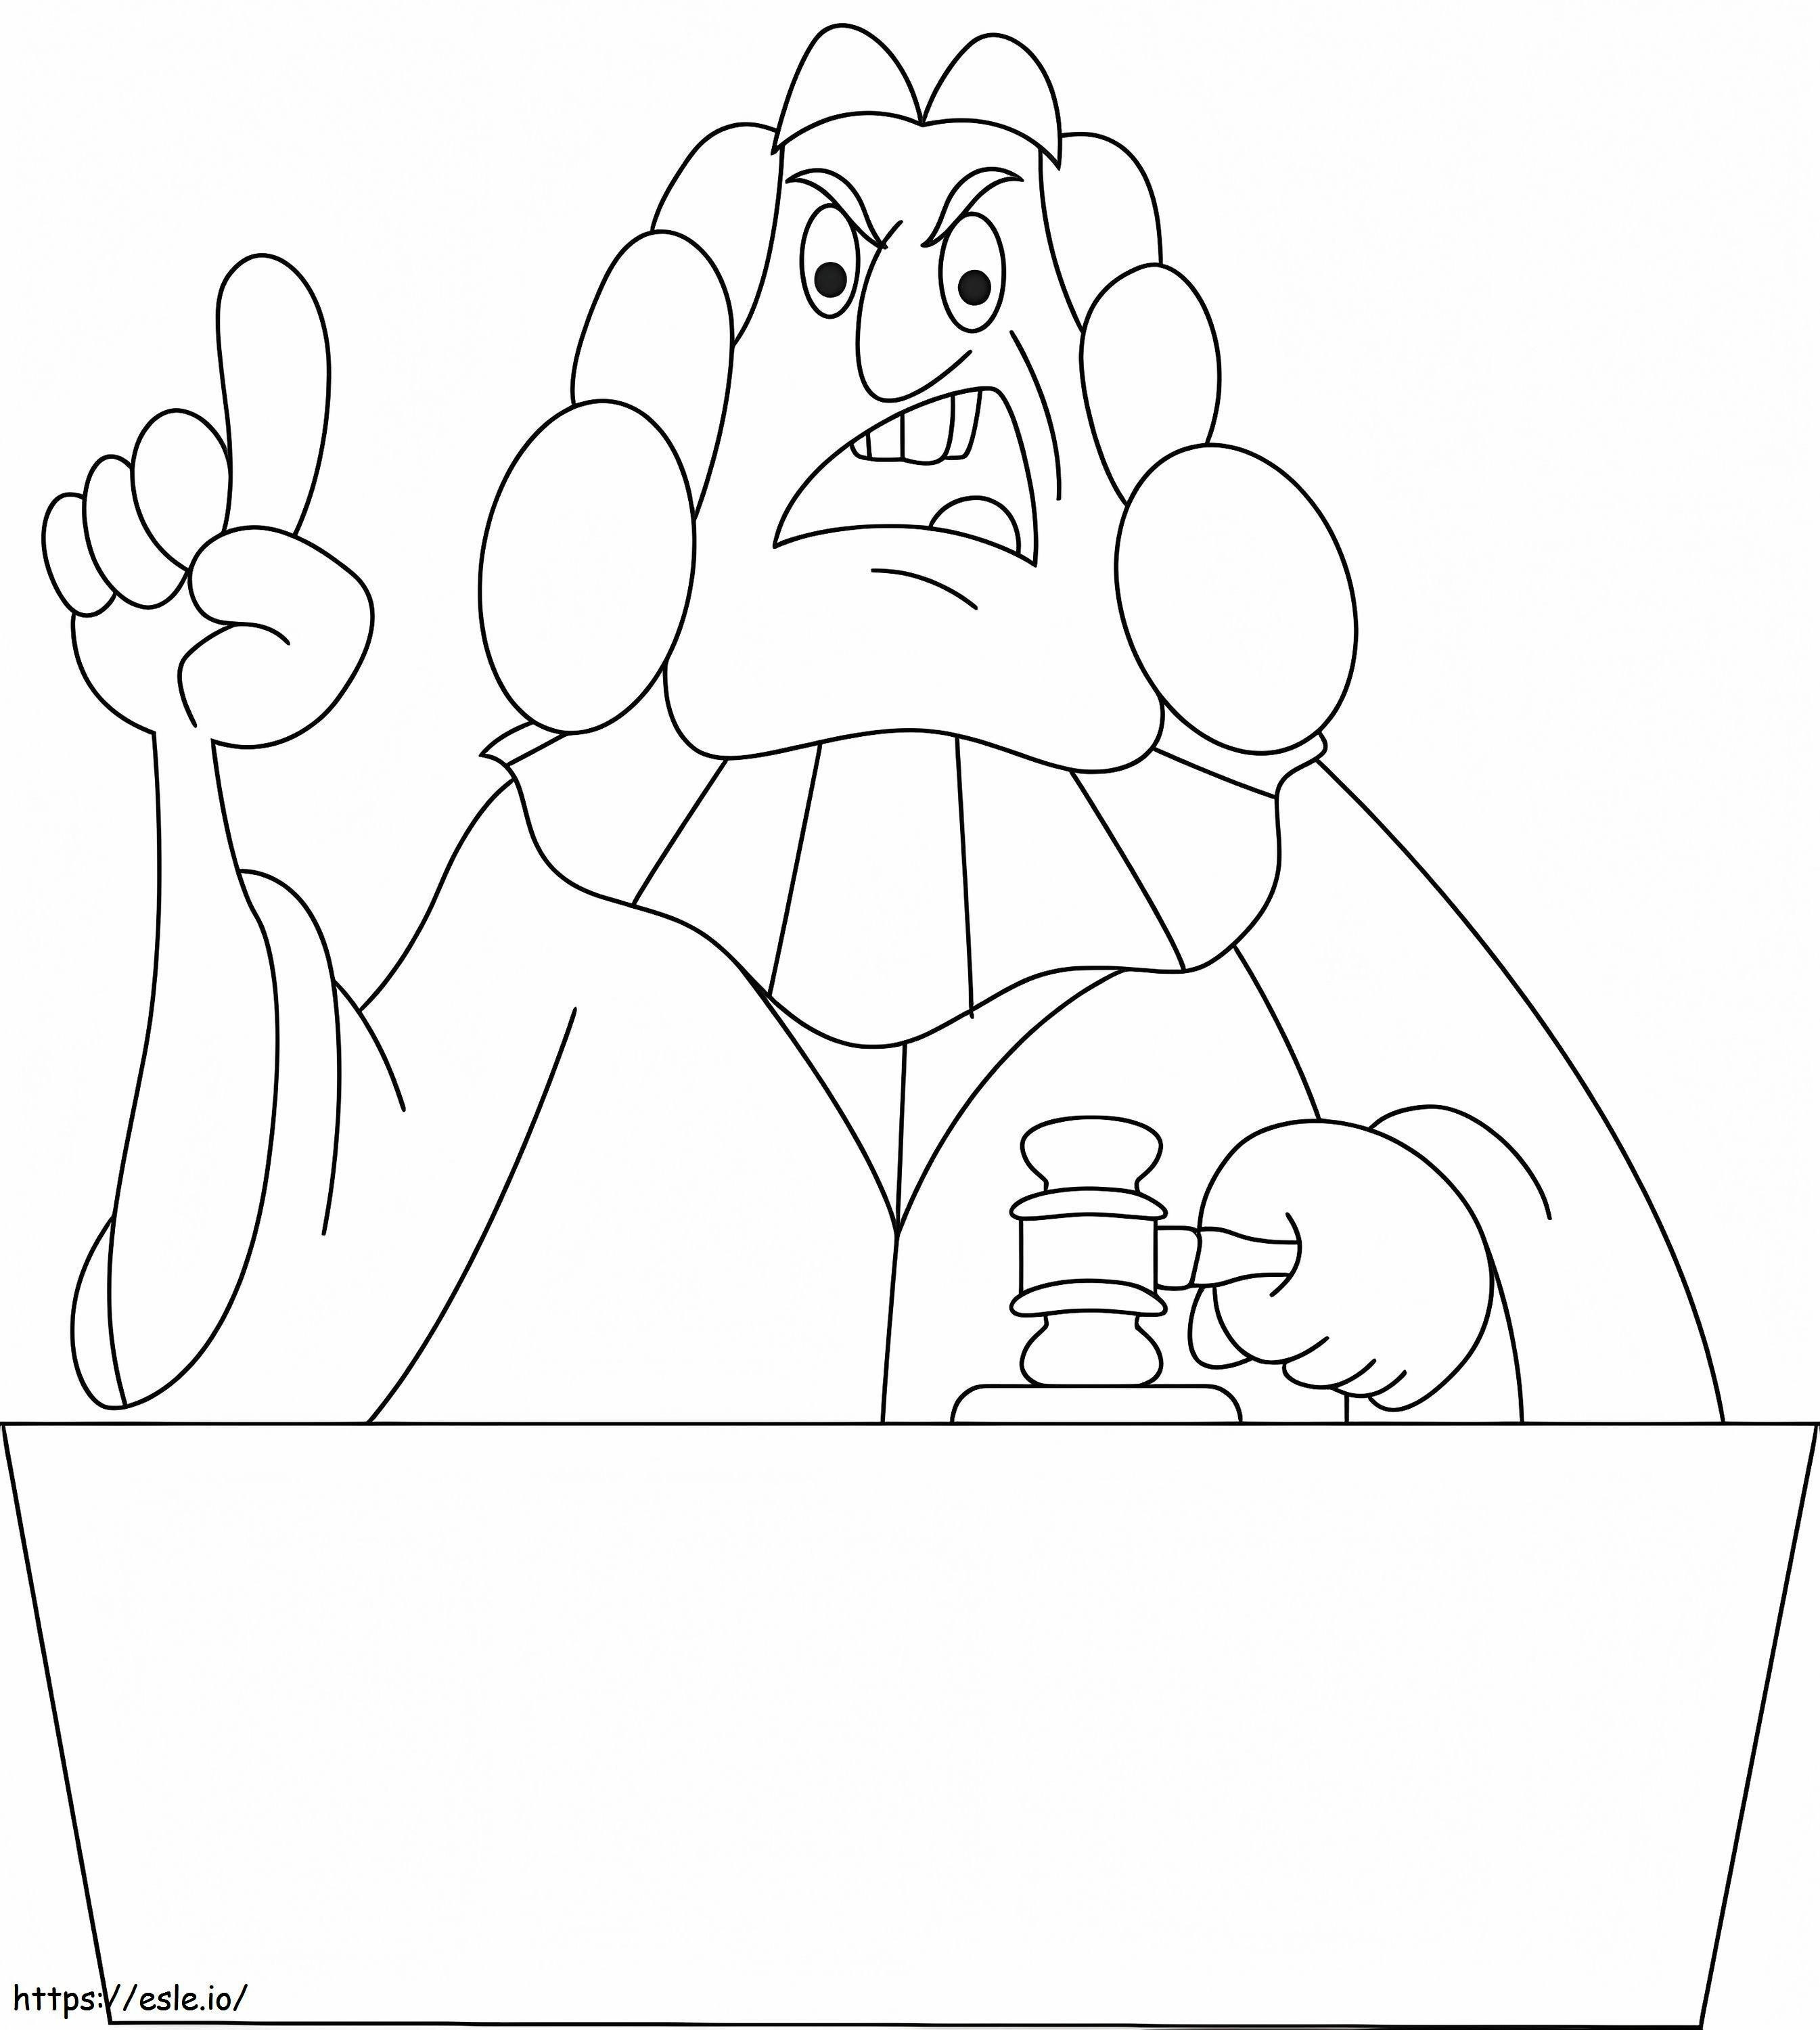 Angry Judge coloring page